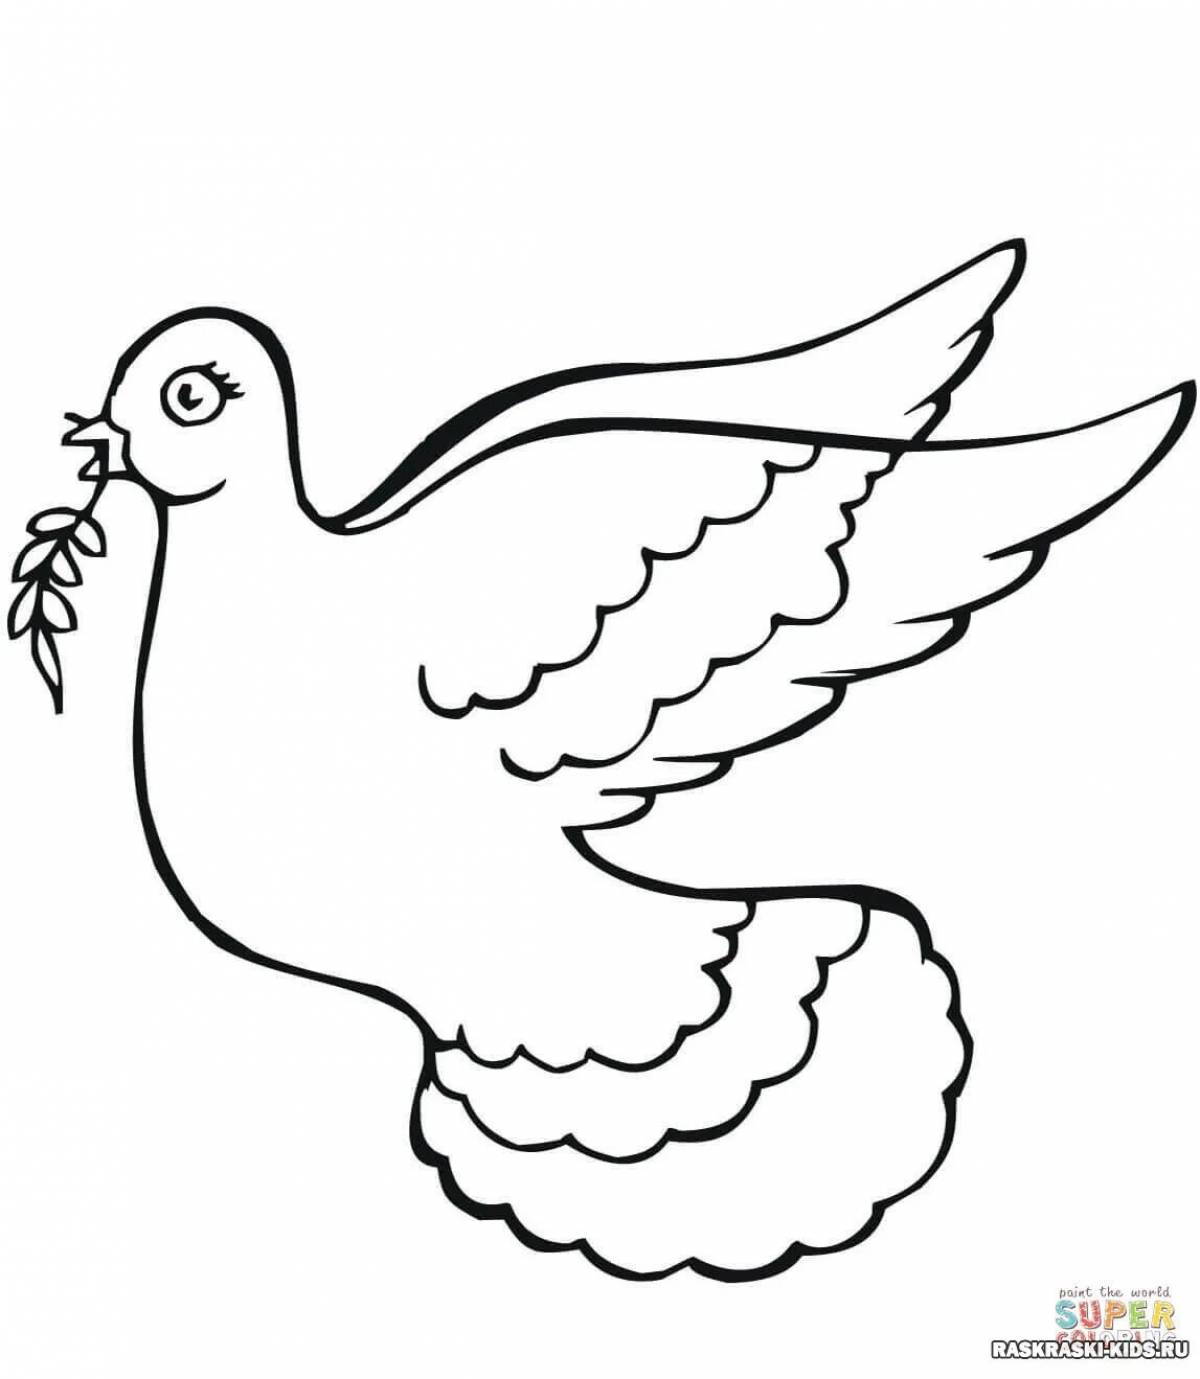 Peace dove for kids template #2